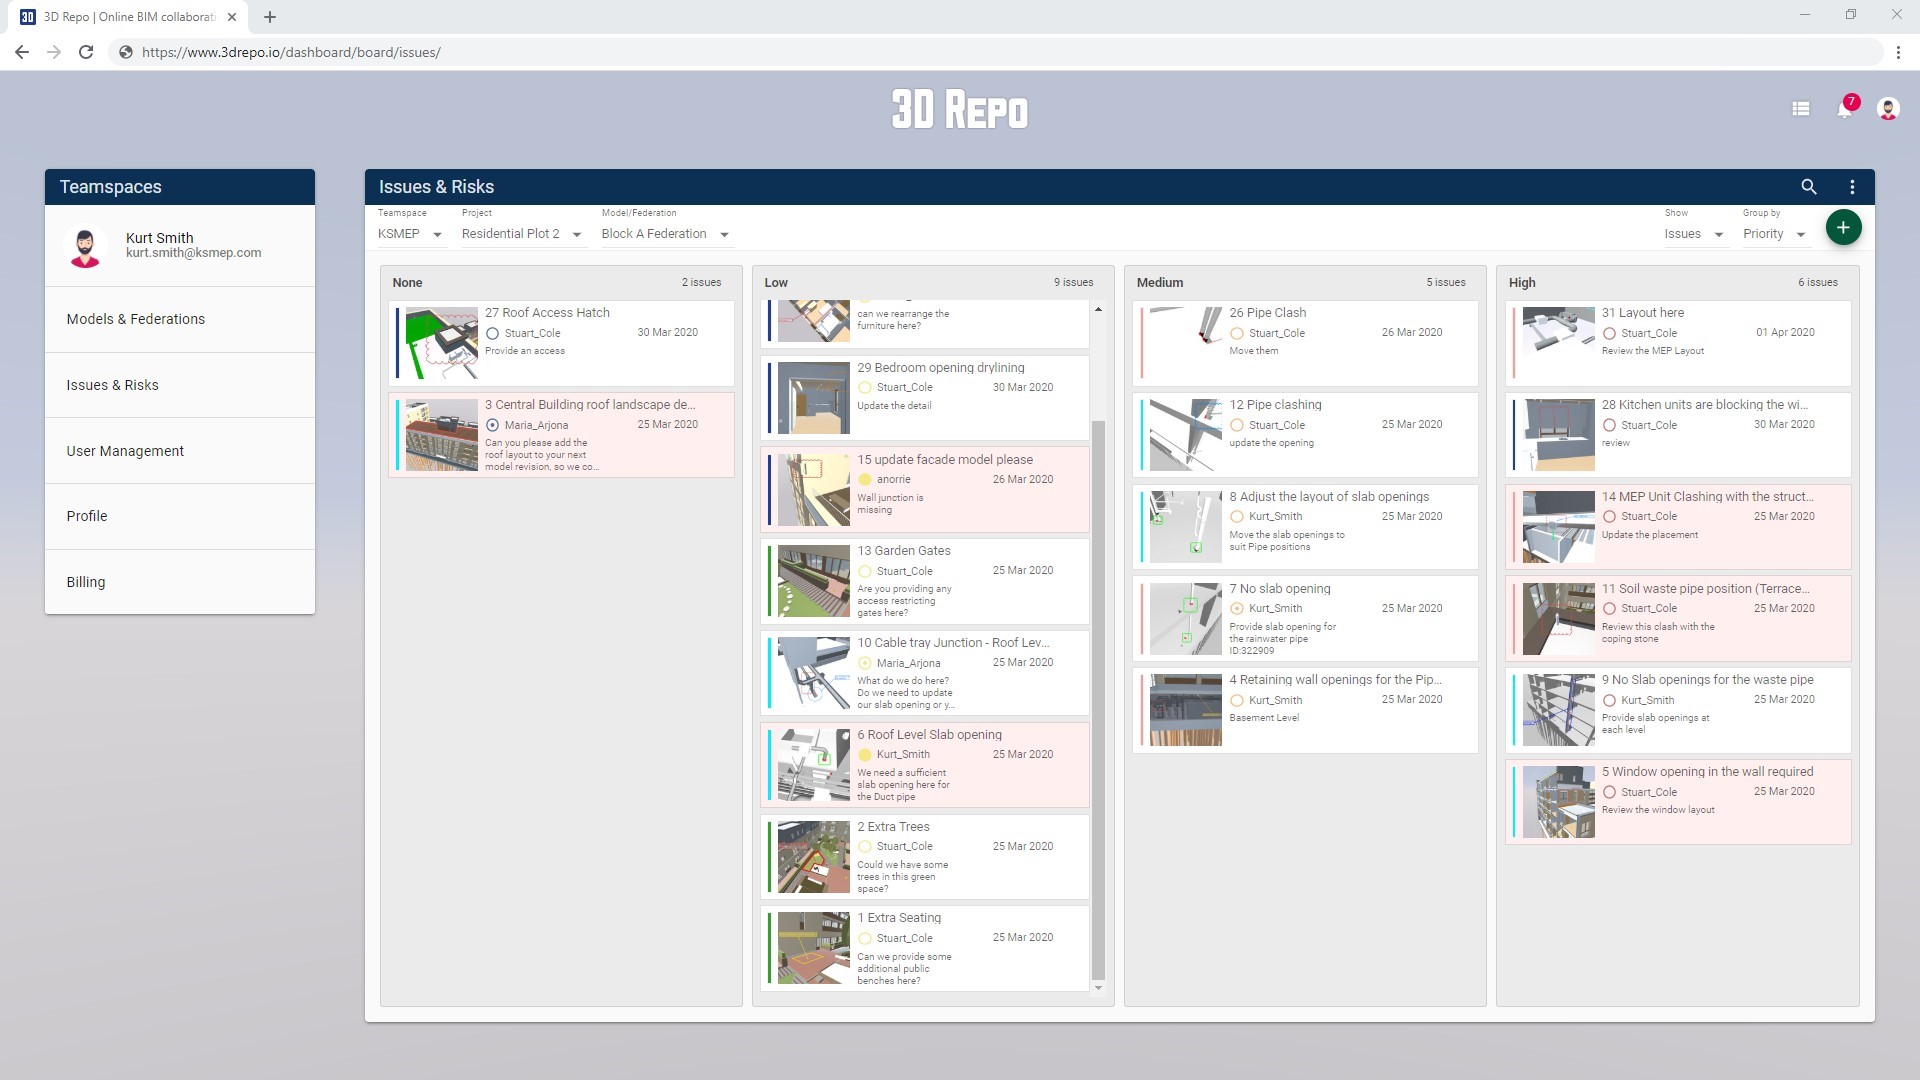 The Kanban board allows all users to view, sort, edit, and even add new issues and risks without loading the 3D model.